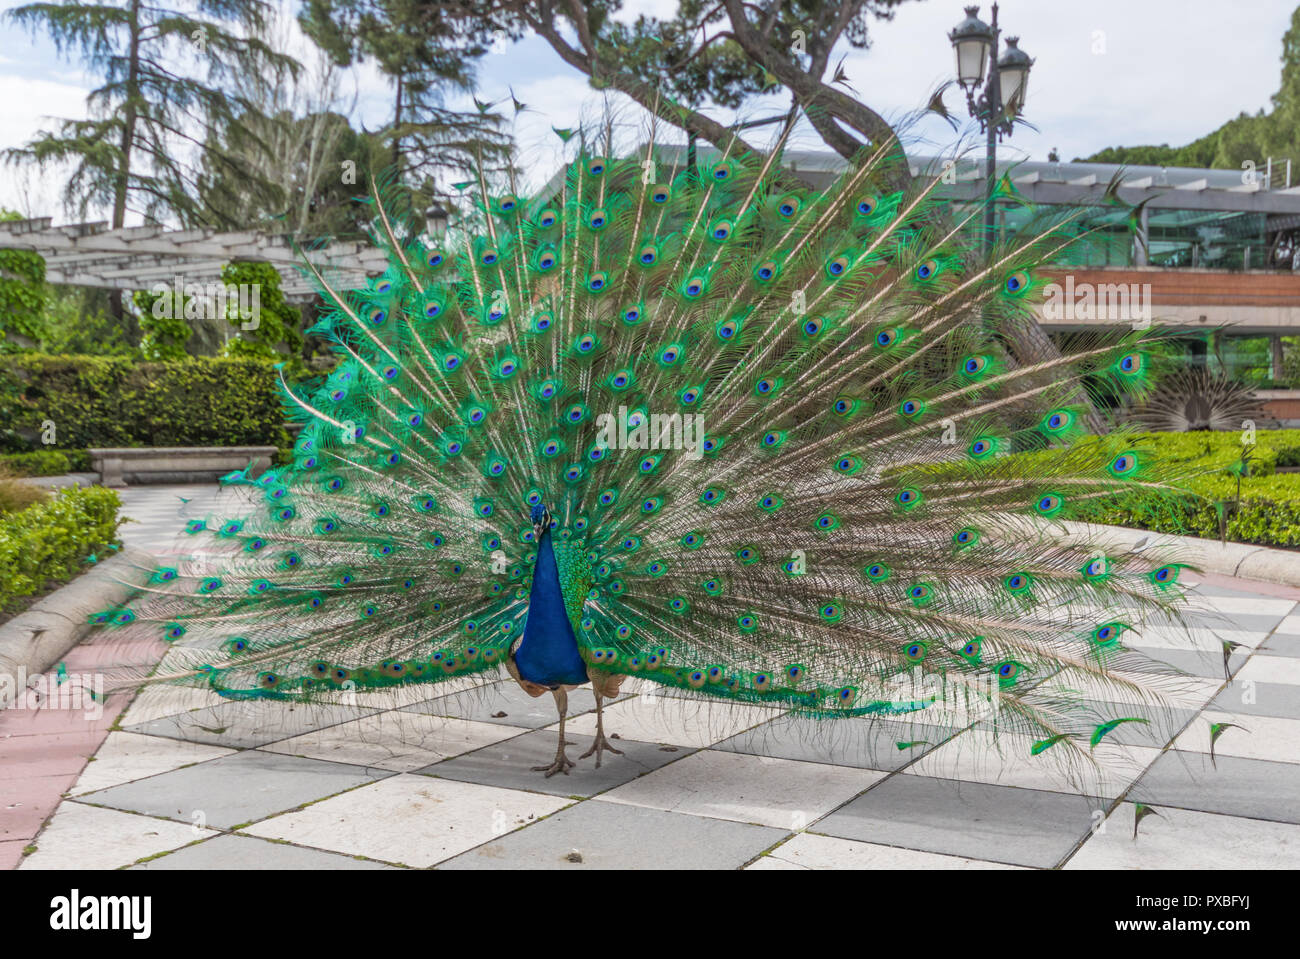 The Buen Retiro park is one of the numerous parks and gardens of the spanish capital. Here in particular its more famous guests, the peacocks Stock Photo